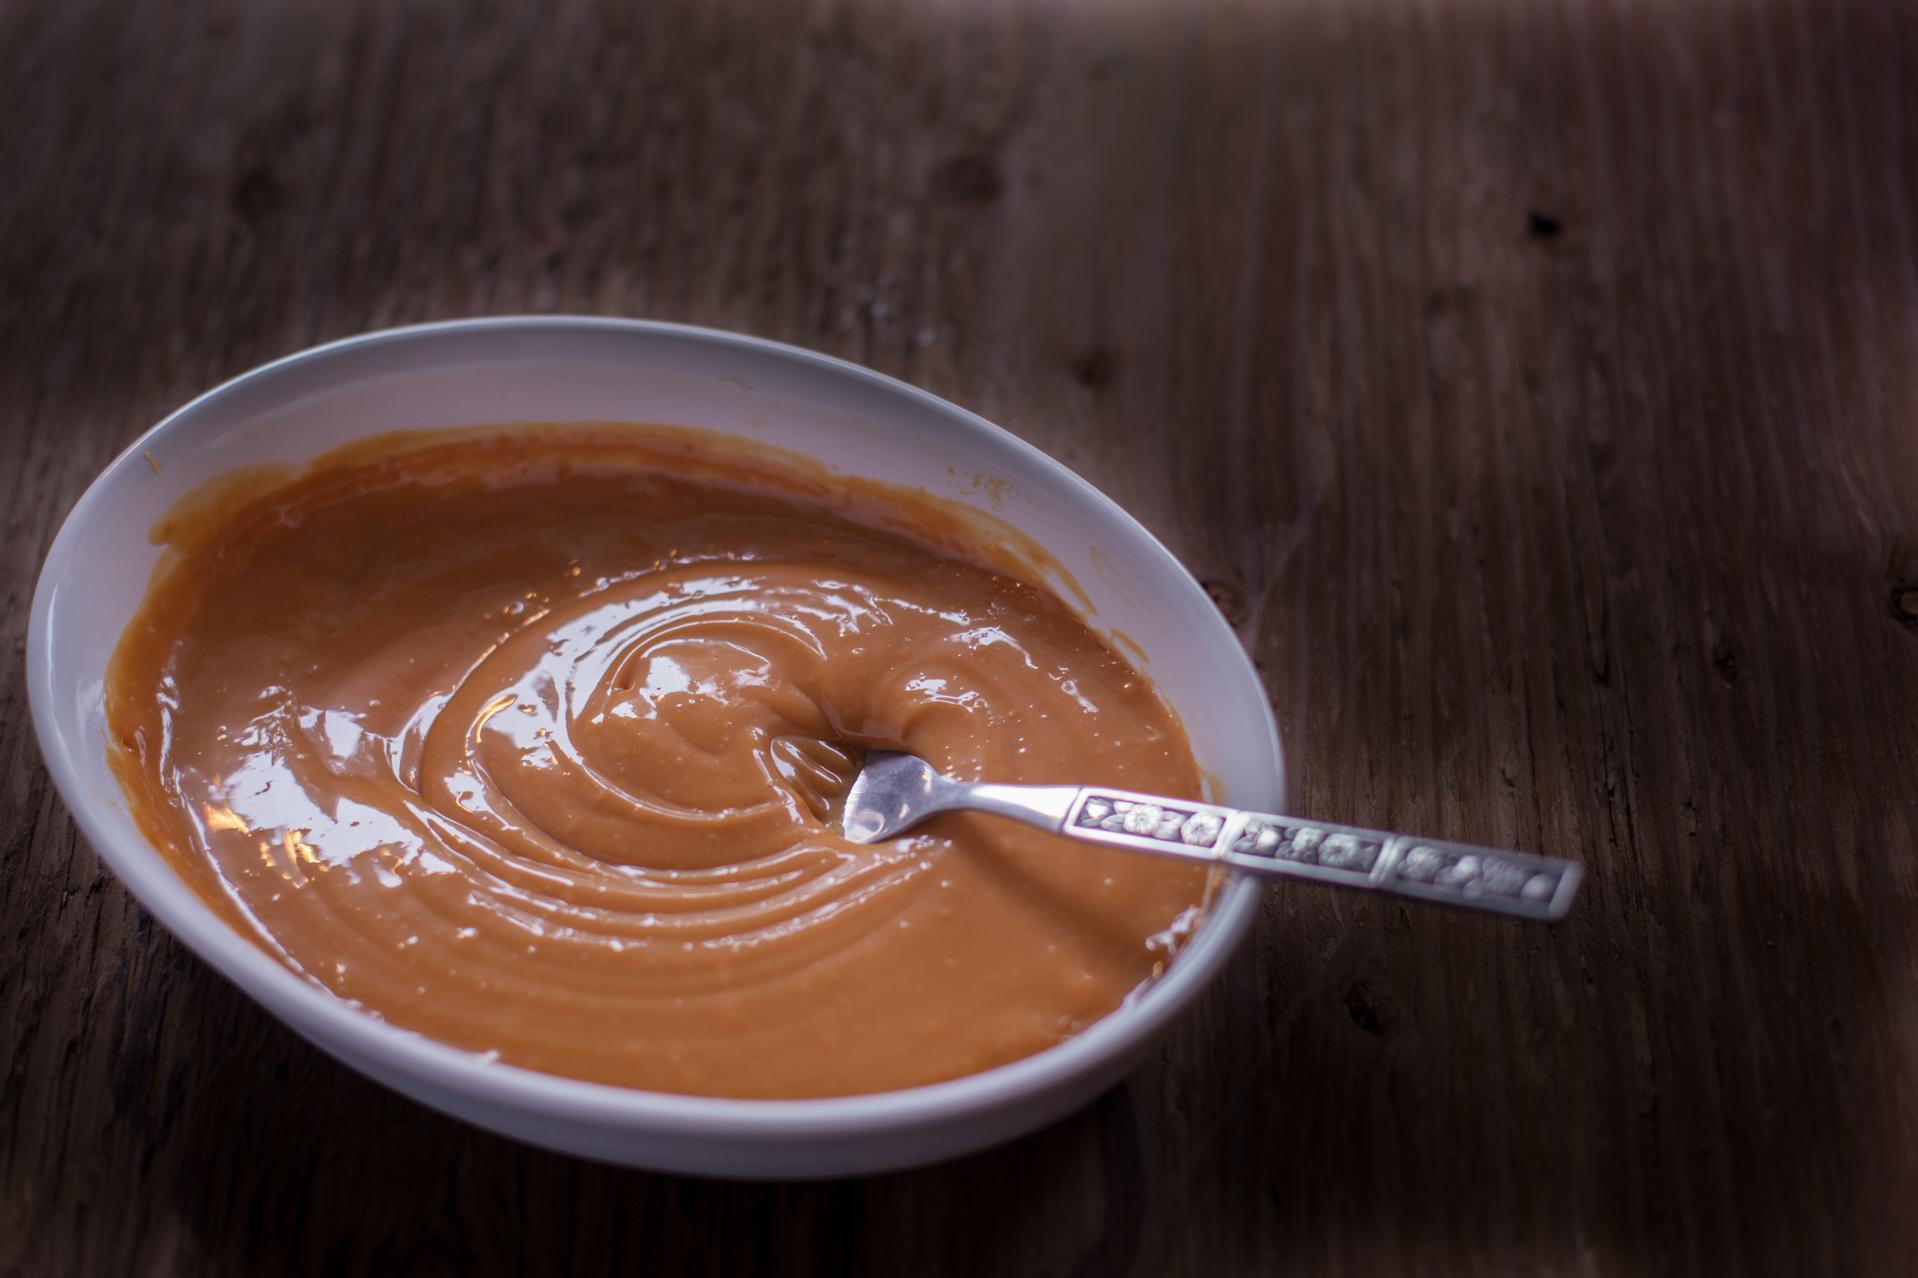  A drizzle of dulce de leche makes everything better!